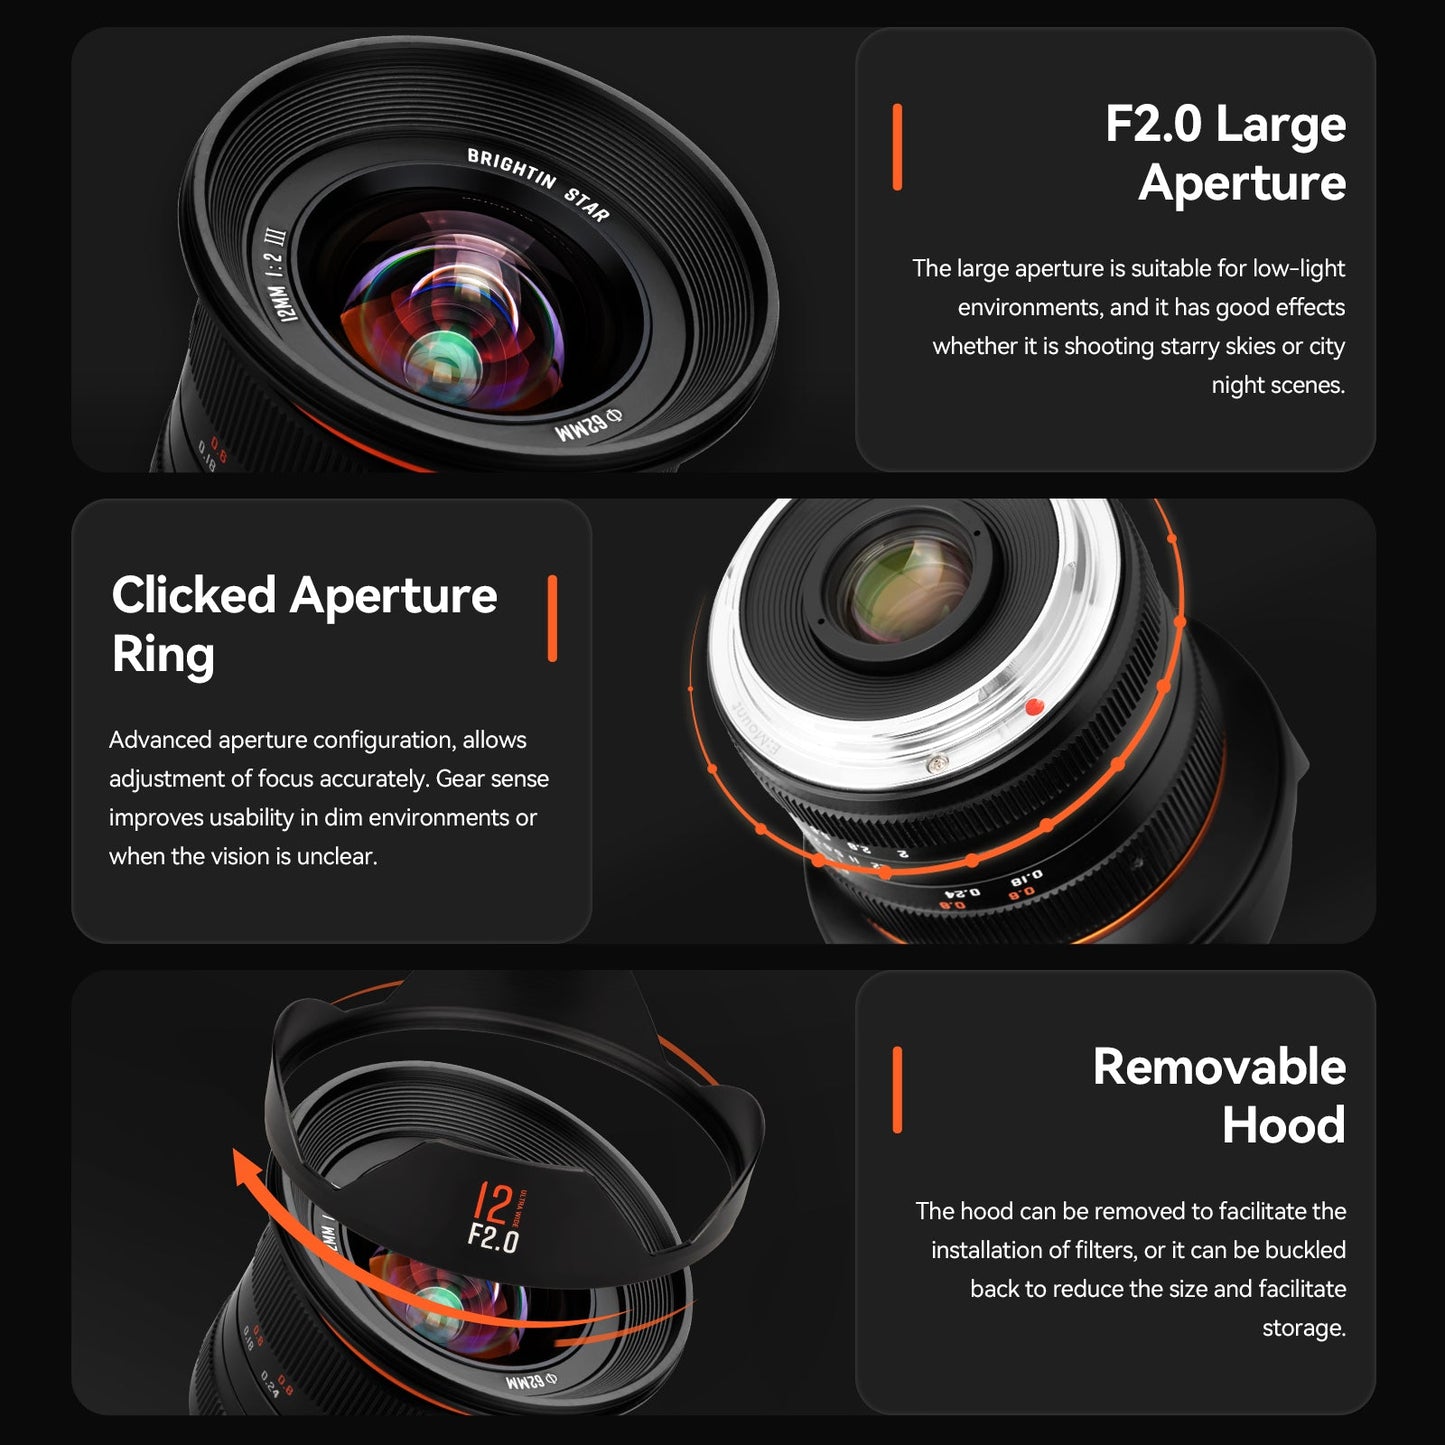 12mm F2.0 III Ultra Wide-Angle Big Aperture APS-C Manual Focus Mirrorless Cameras Lens, Fit for Canon EF-M/RF Nikon Z M4/3 Sony E Fuji X